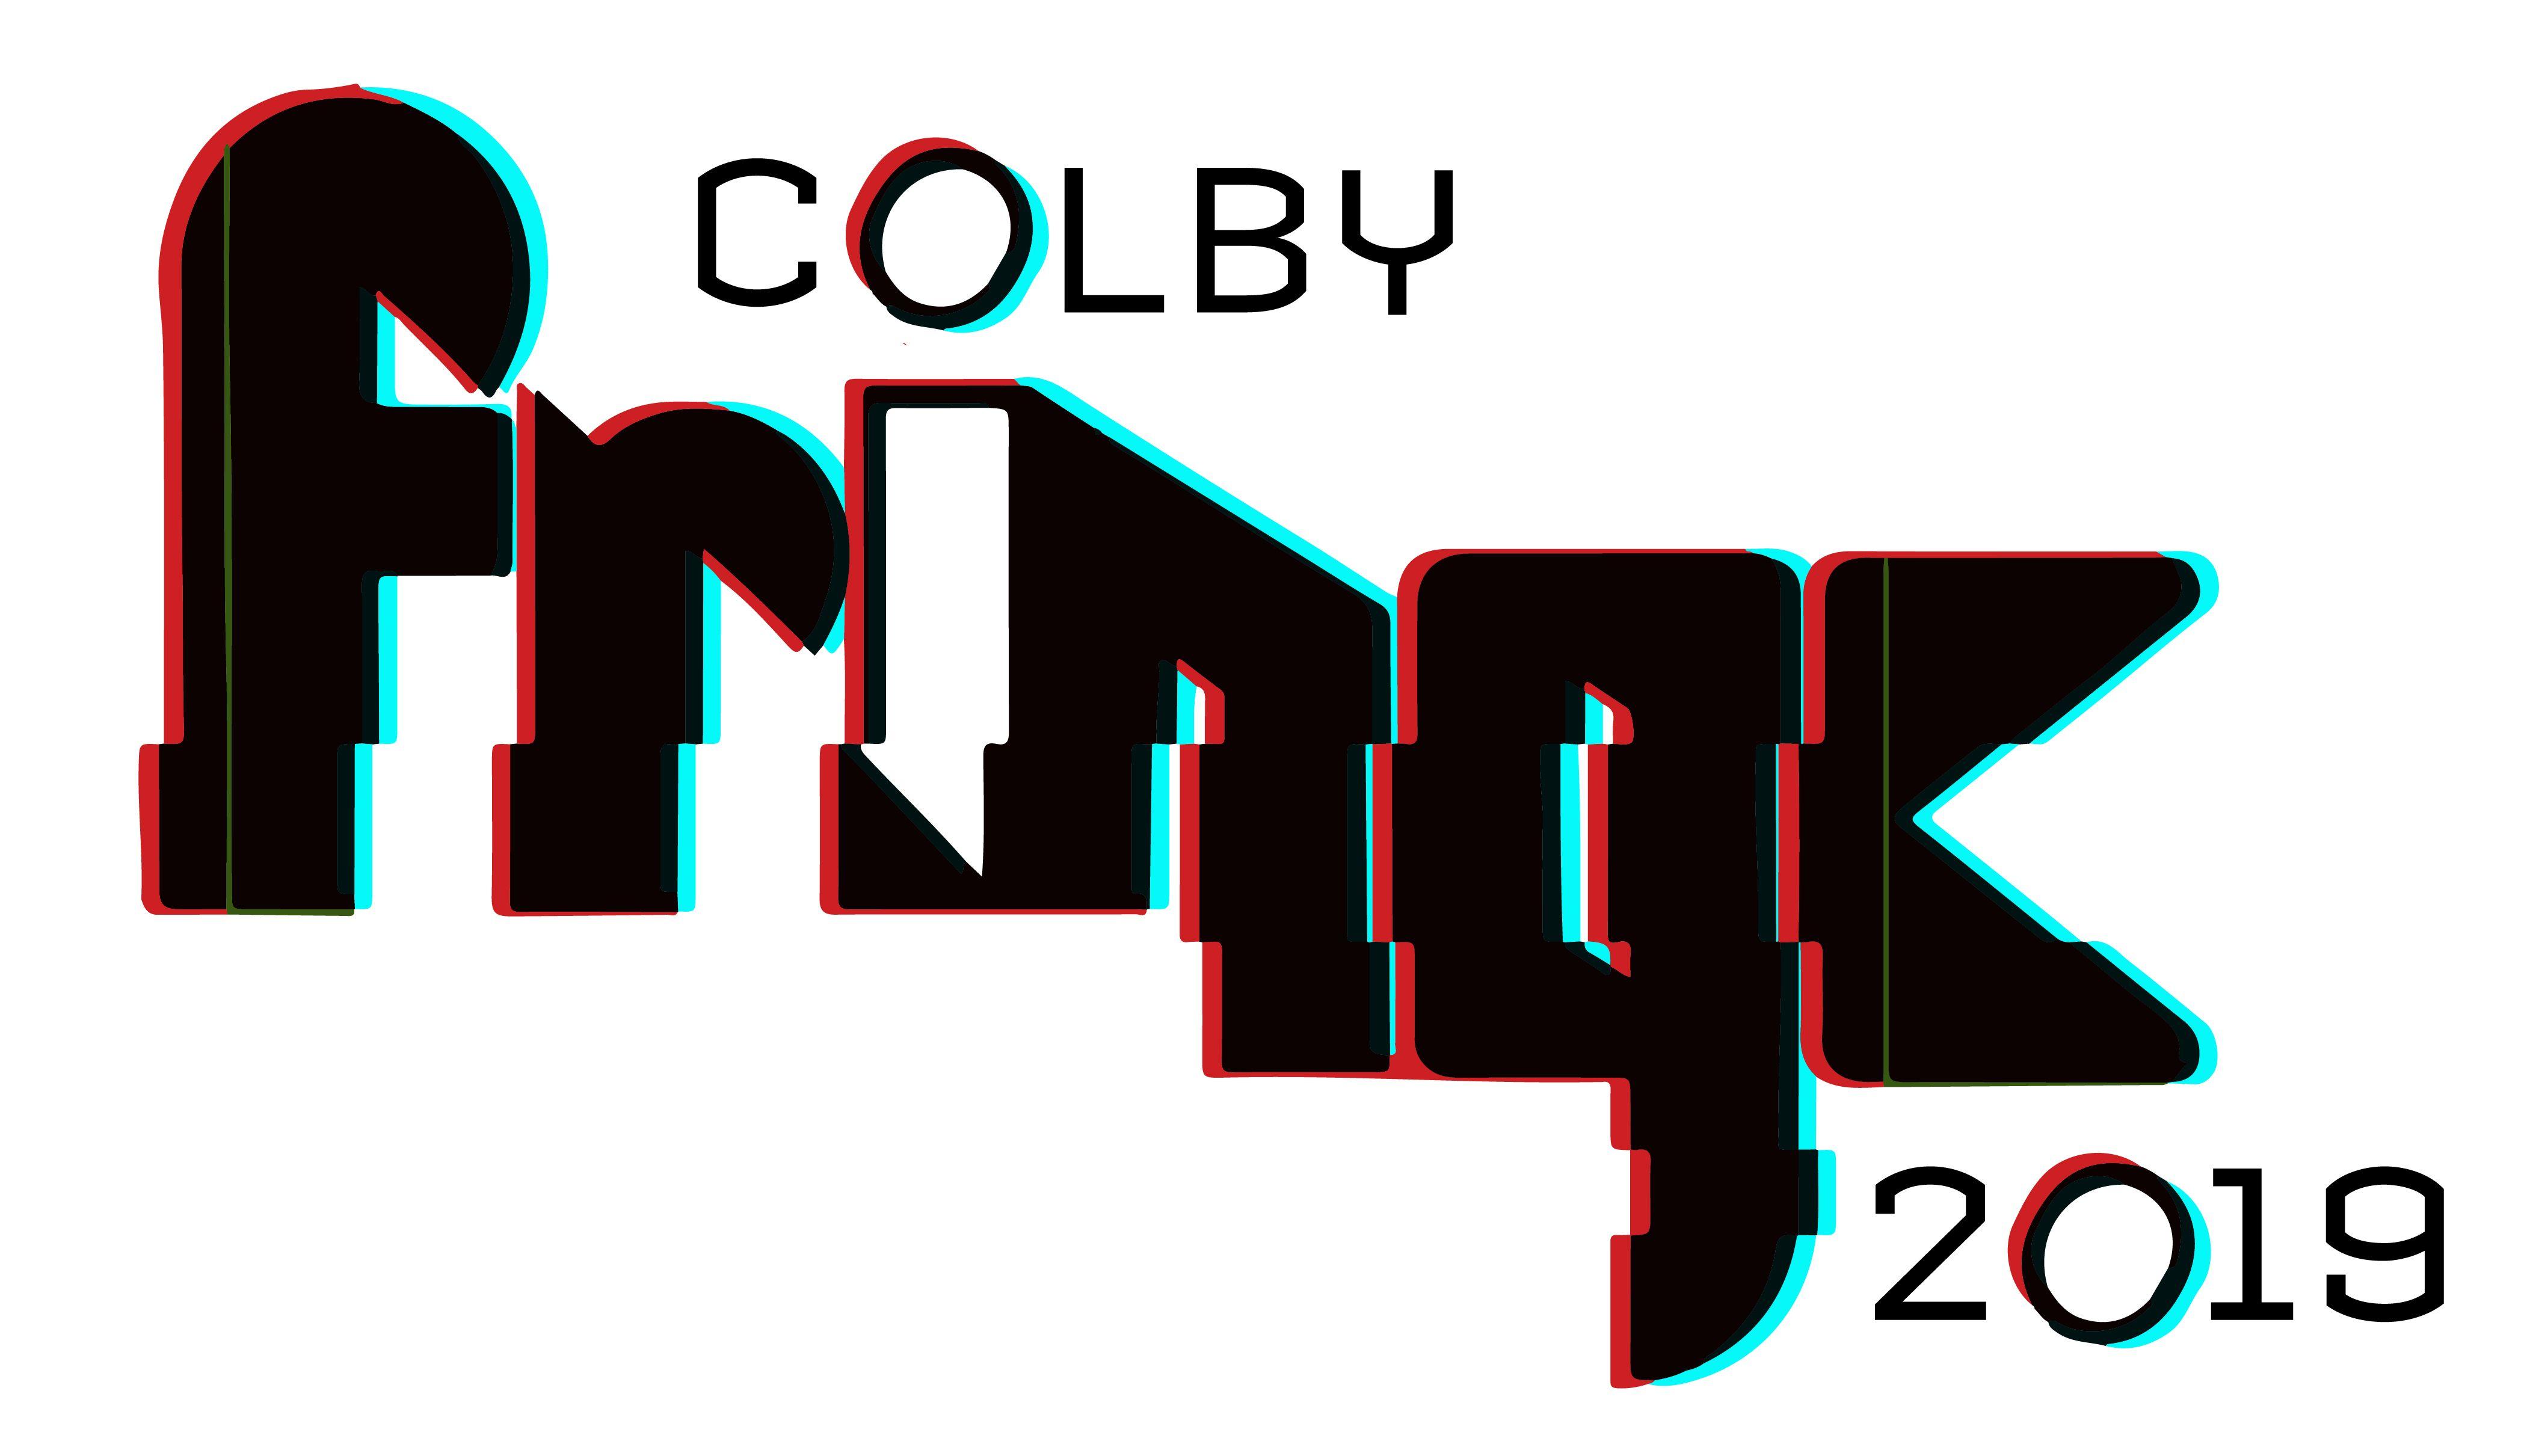 Fringe Logo - Colby FRINGE Festival | Theater and Dance | Colby College